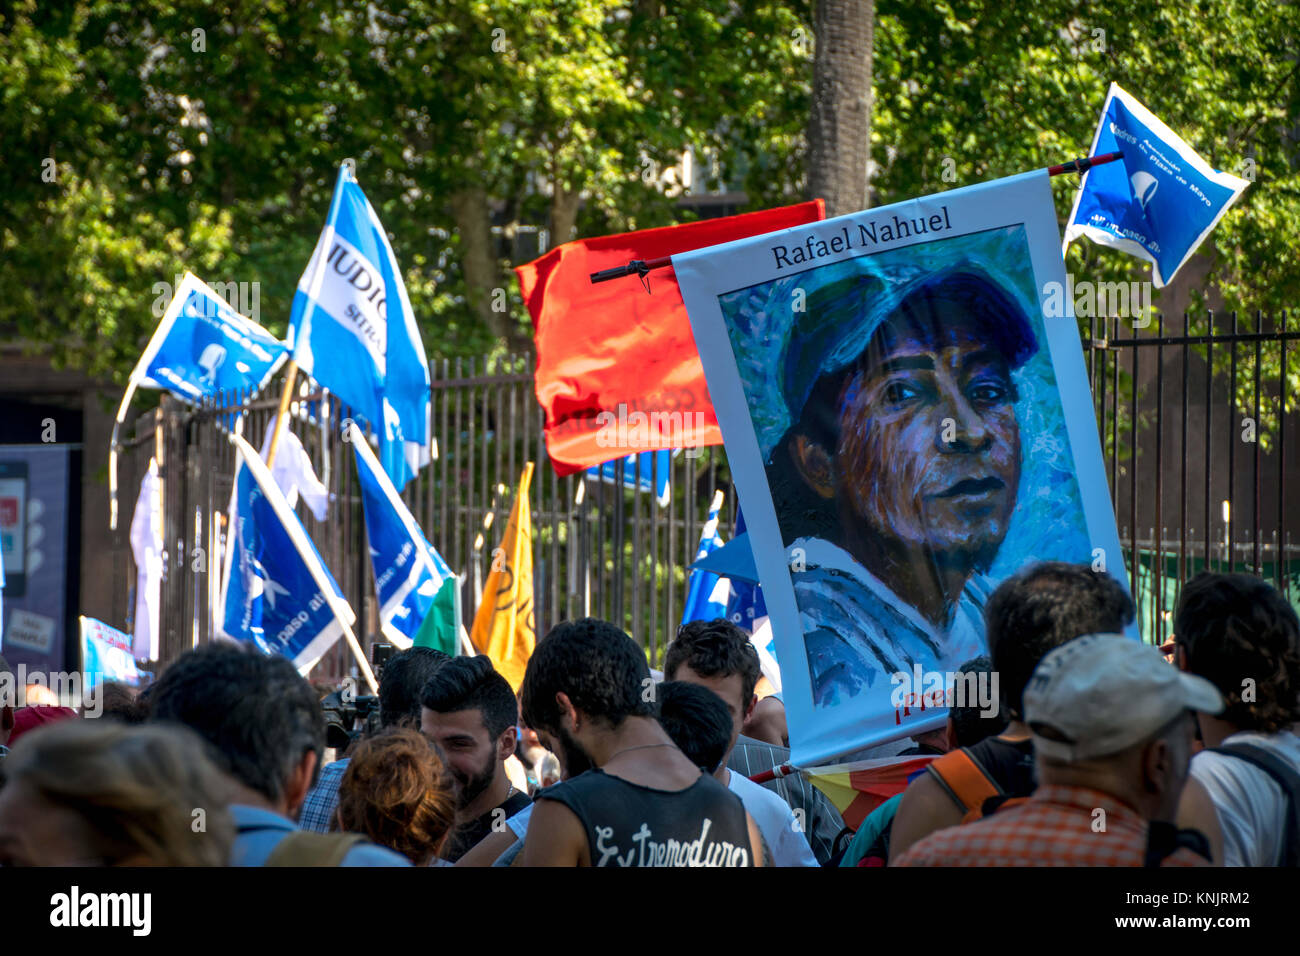 December 7, 2017 - Buenos Aires, Ciudad AutÃ³noma de Buenos Aires, Argentina - Above the crowd appears a poster of Rafael Nahuel, a young Mapuche man shot by Argentine authorities in November. These protestors are marching with the 'Madres' of Plaza de Mayo, a group of women who's children were disappeared by the Argentine dictatorship in the 1970's. They've been marching outside the government offices in Plaza de Mayo for 40 years. Credit: Jason Sheil/SOPA/ZUMA Wire/Alamy Live News Stock Photo